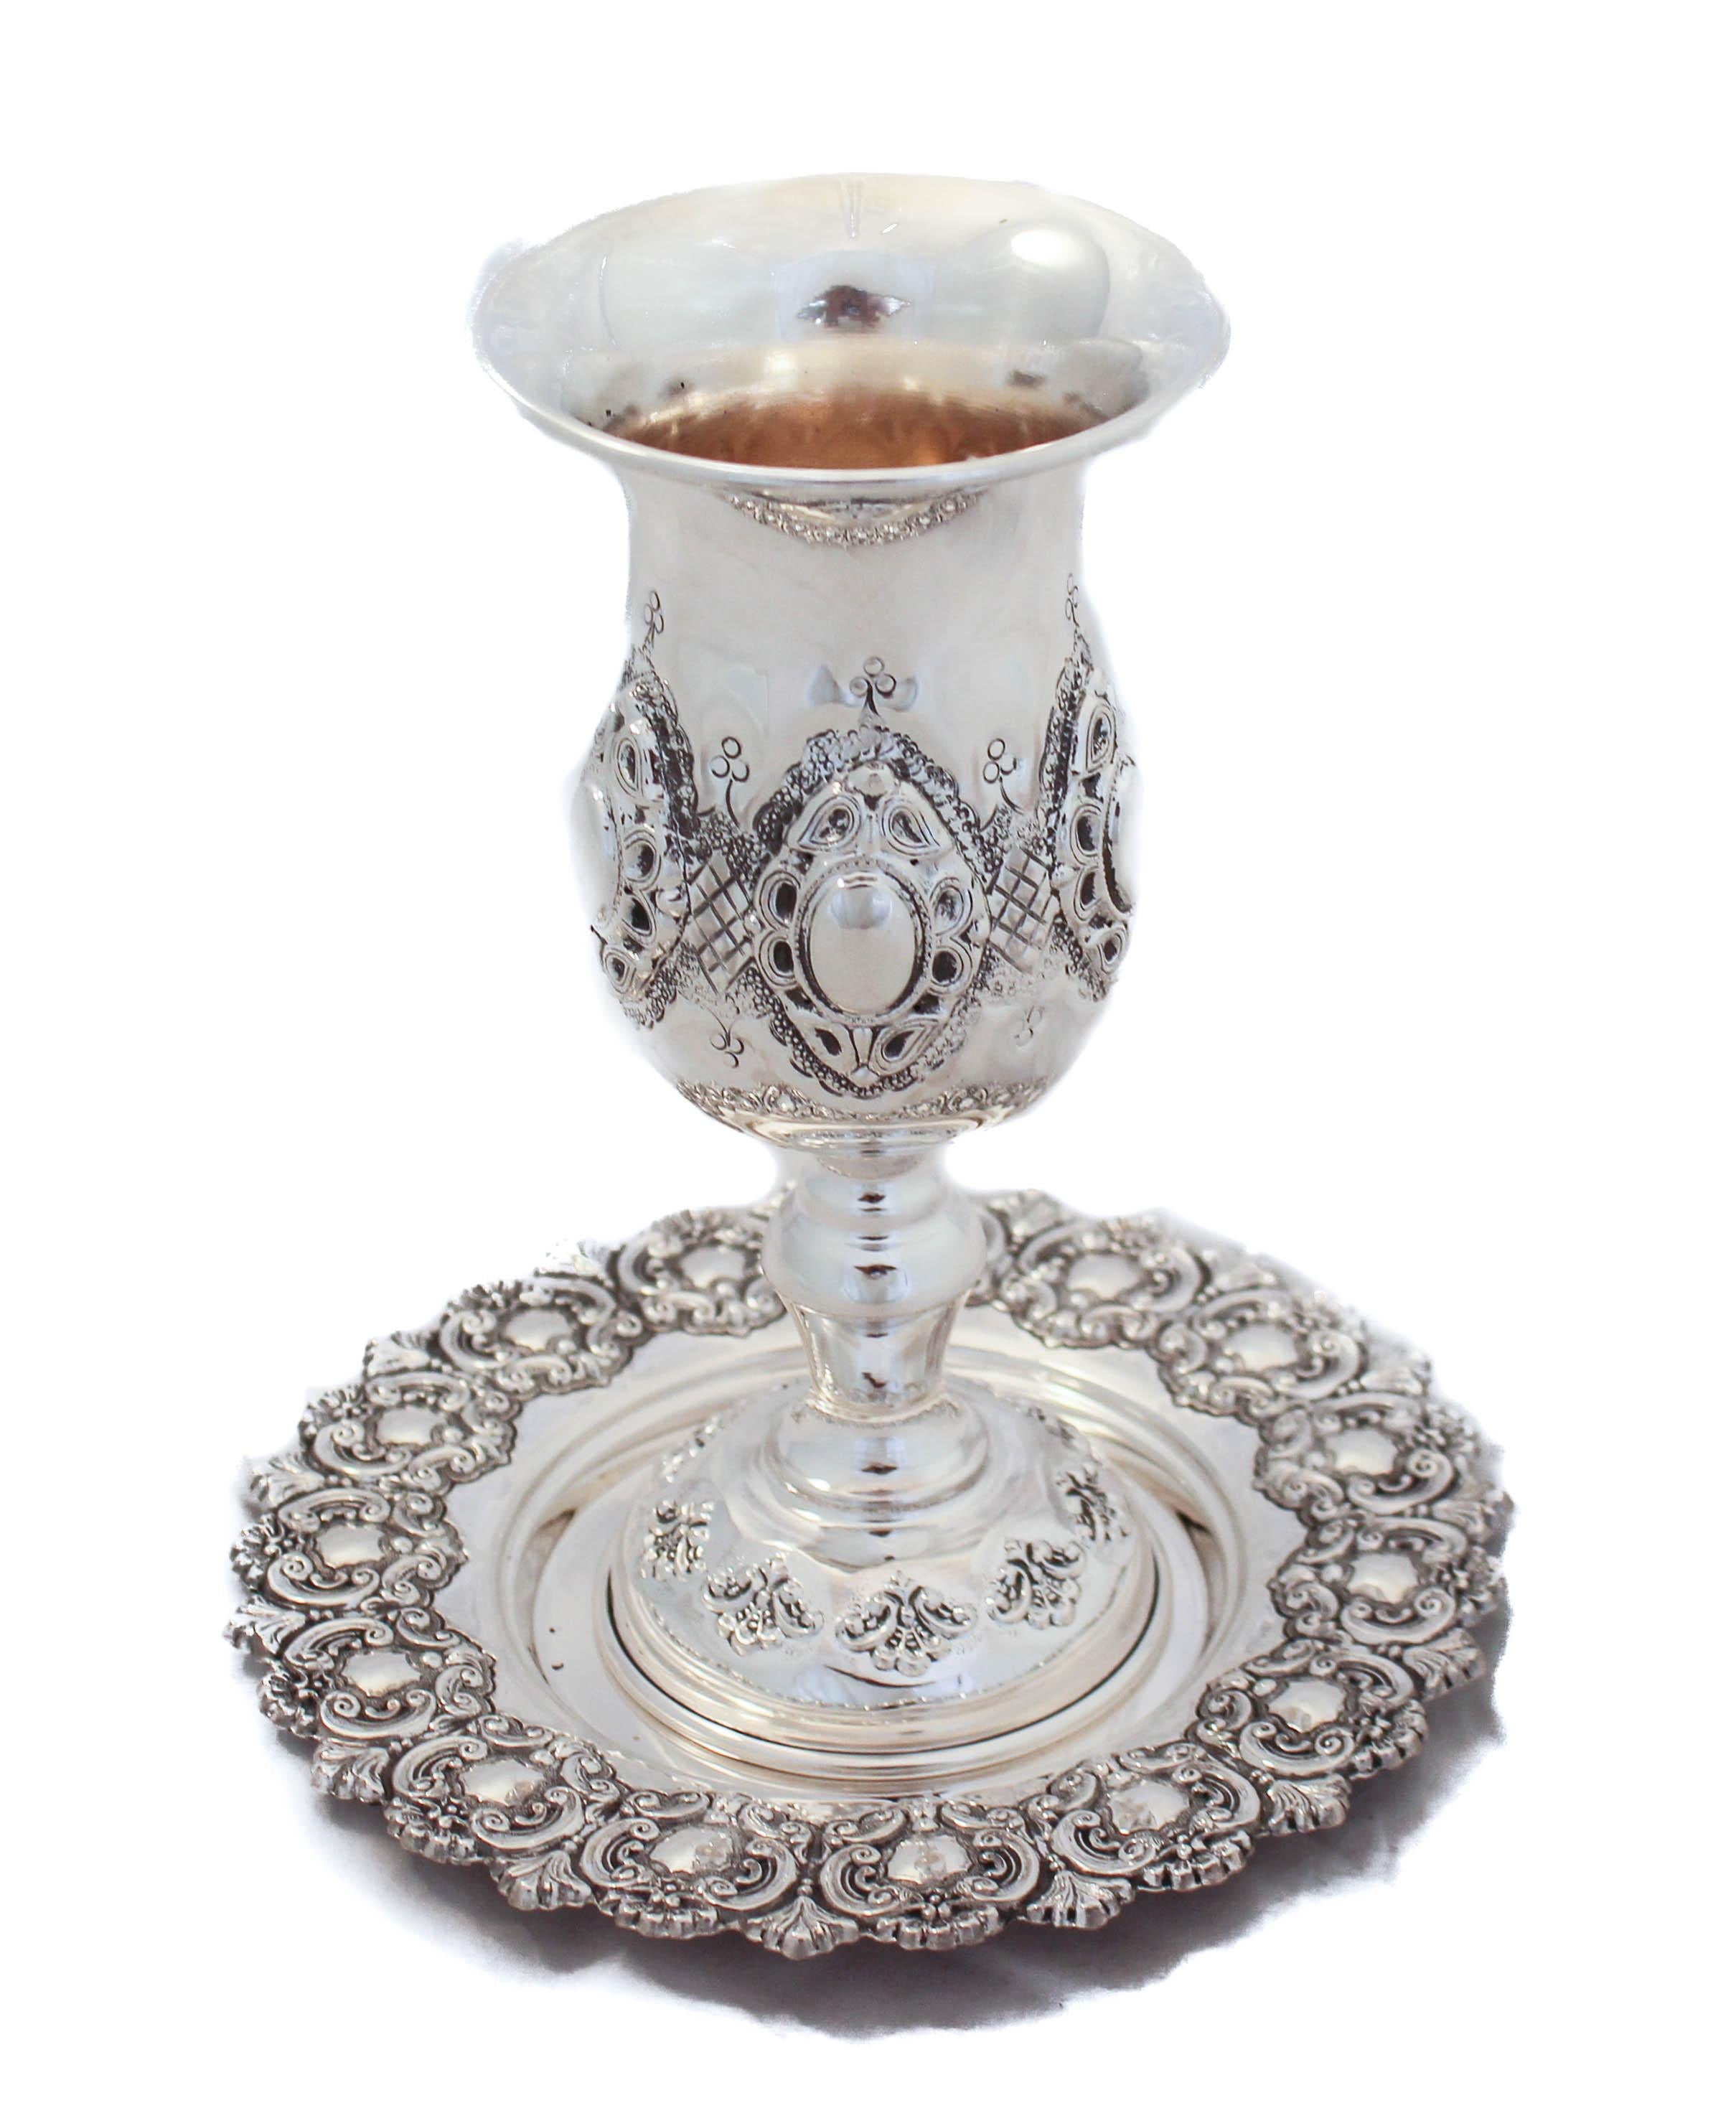 The Sabbath is often referred to as “The Sabbath Queen” and what better way to usher in the holy day than with sterling silver?!
We are happy to offer you this sterling silver Kiddush cup and plate from Israel. It has a rich and impressive